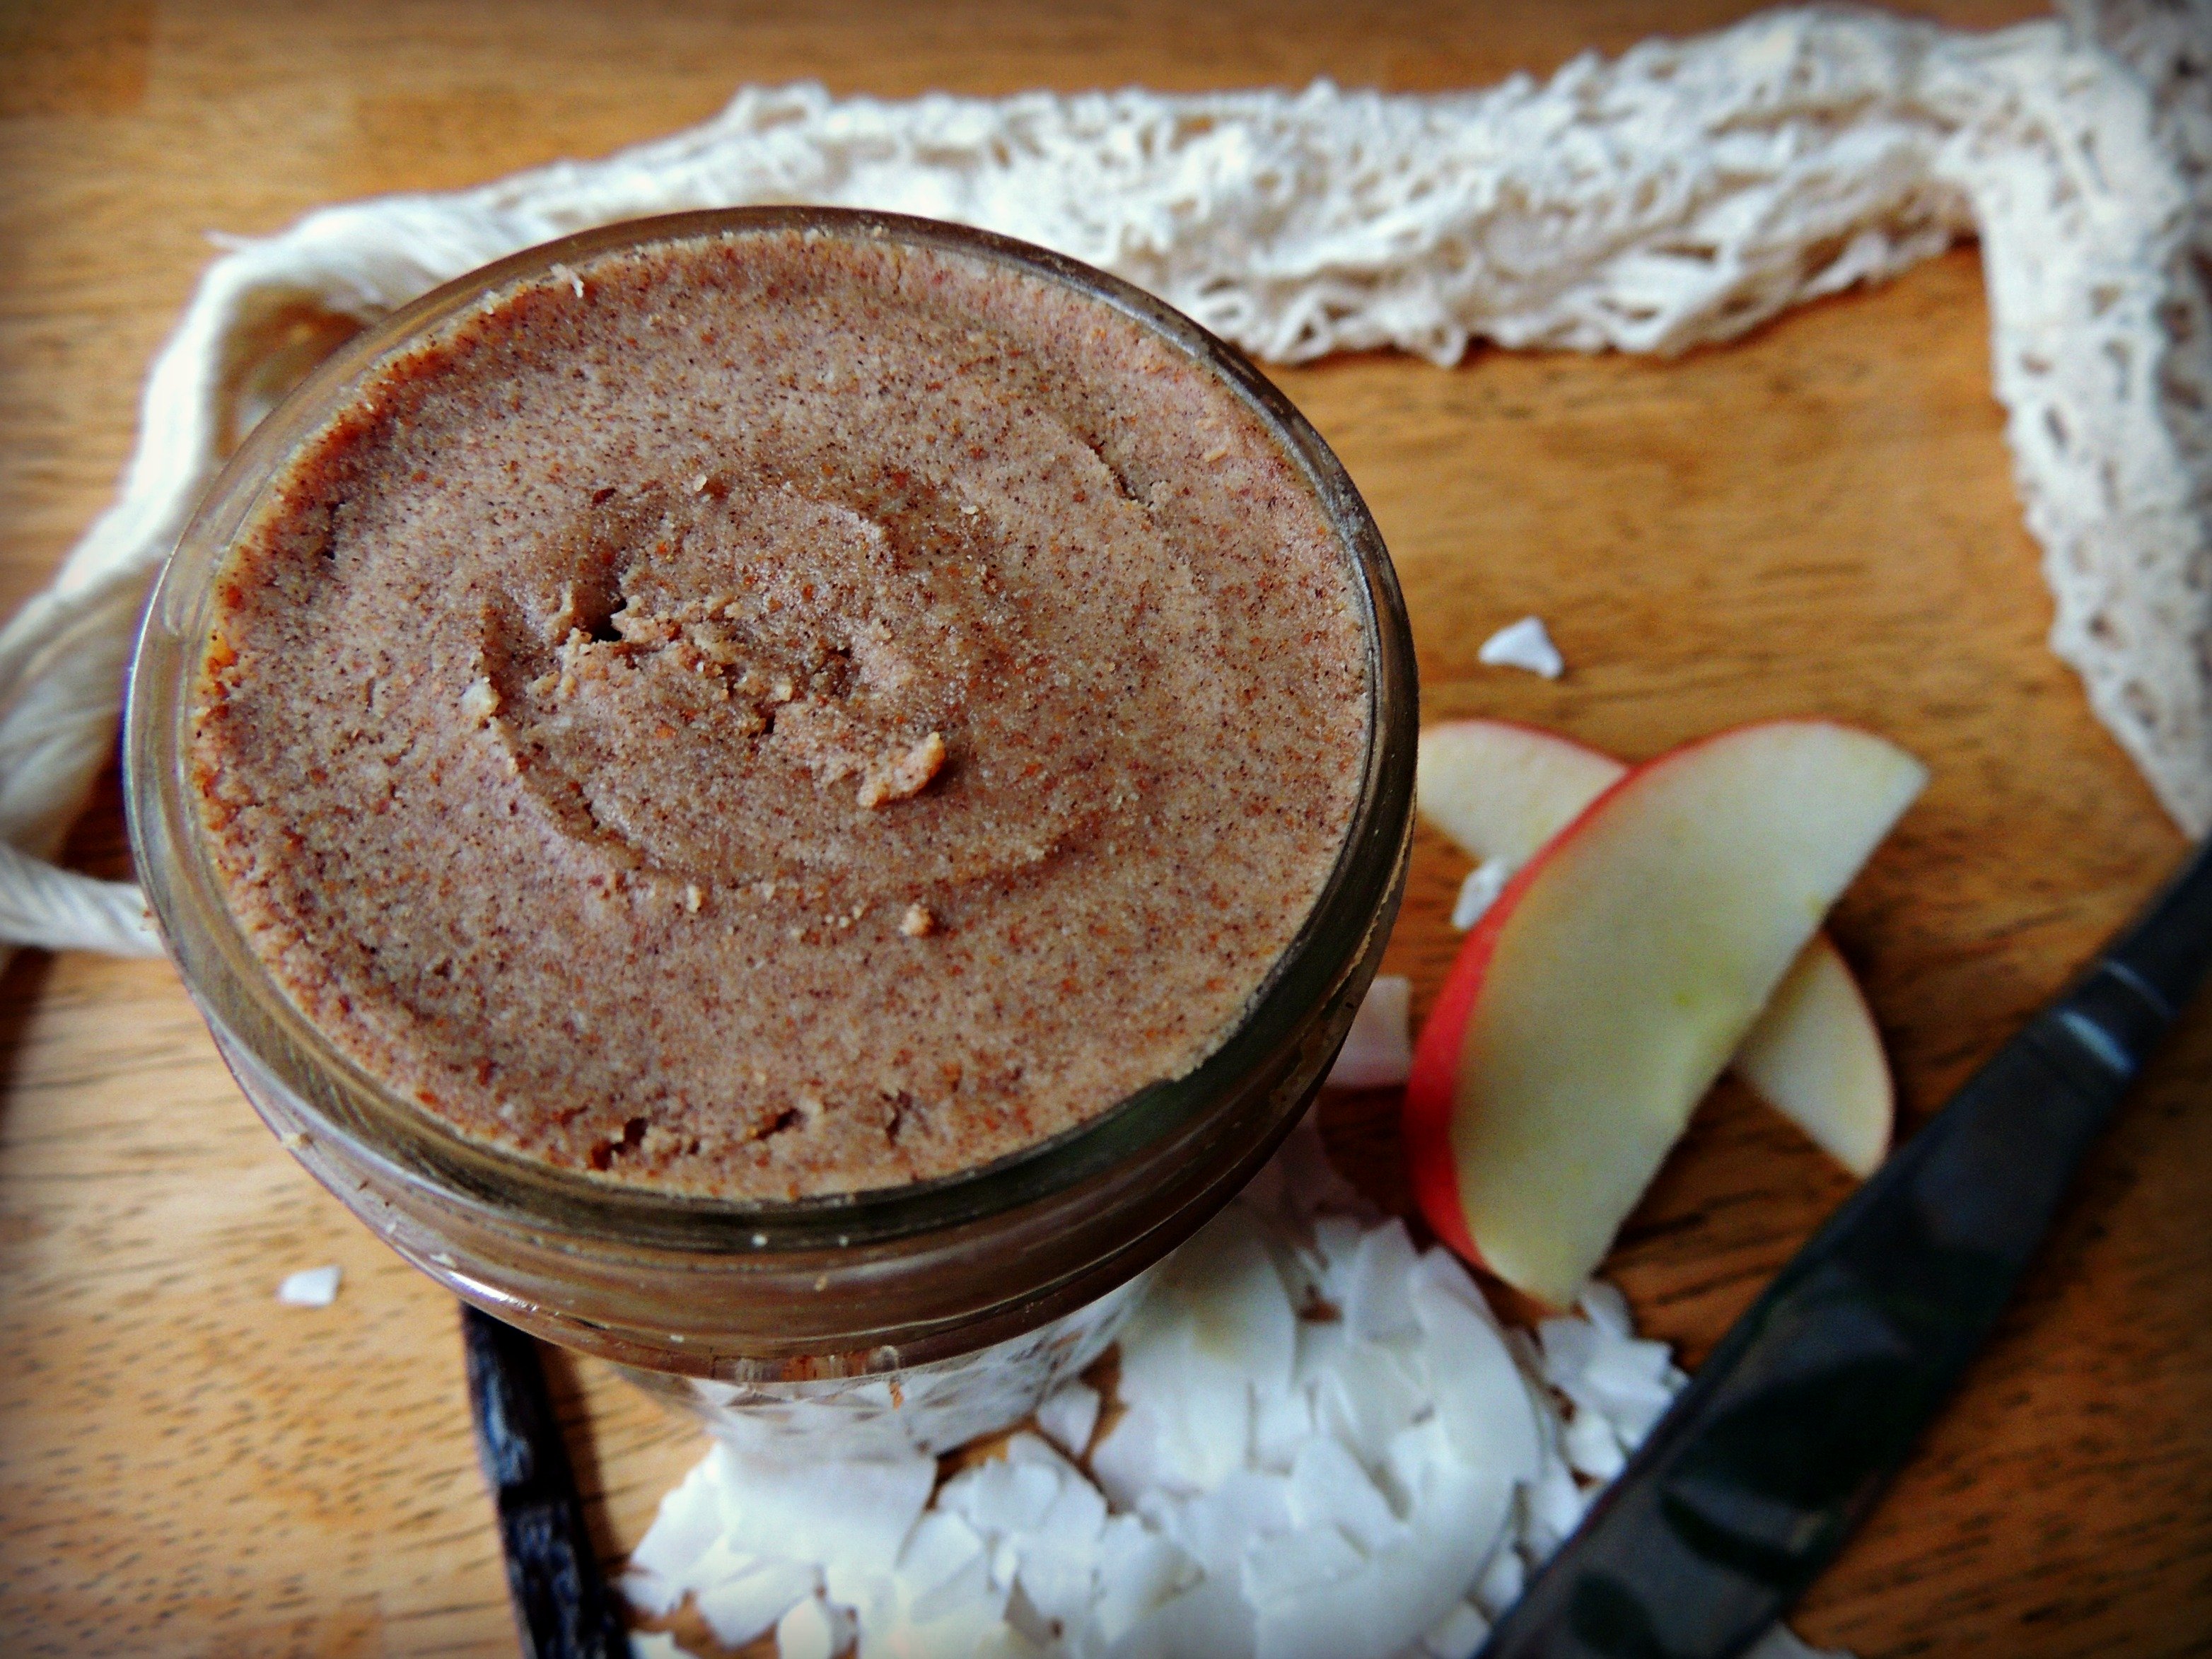 coconut almond butter